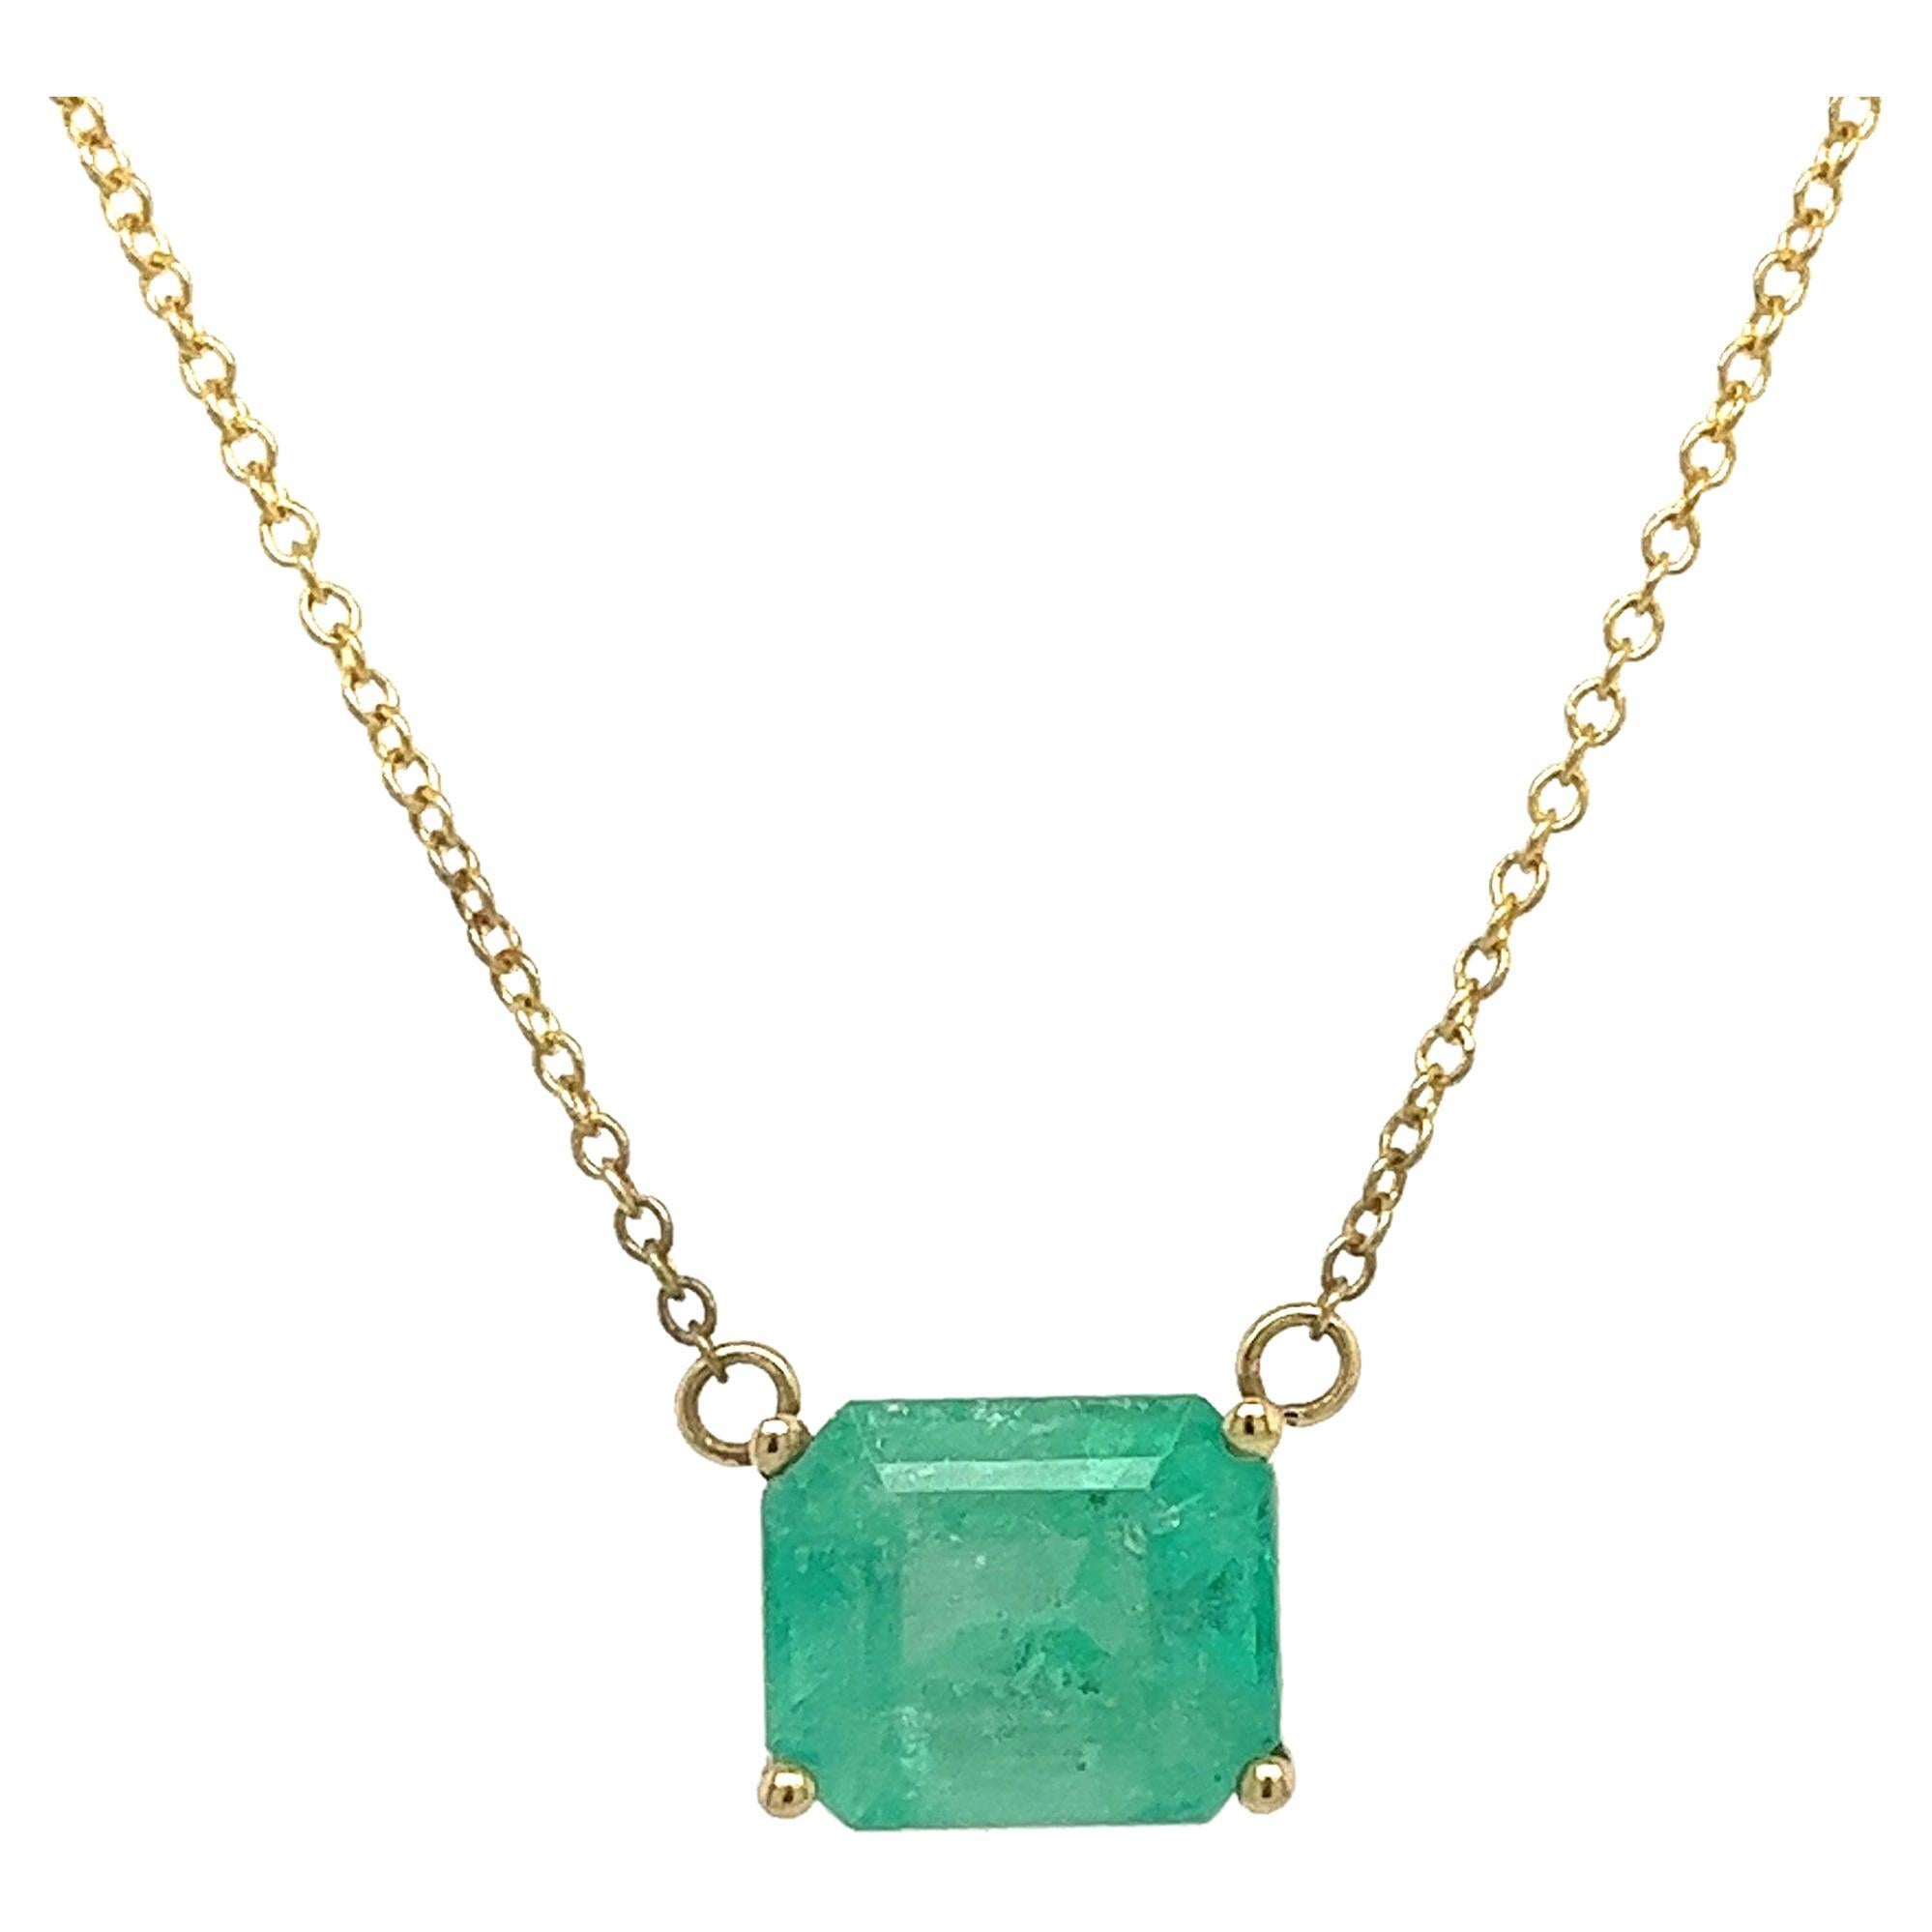 3.66 carat natural Colombian emerald solitaire pendant, gracefully set in a 14K yellow gold cable chain necklace. The pendant features a chic east-west horizontally set center stone. Necklace features an adjustable-length cable chain, offering a